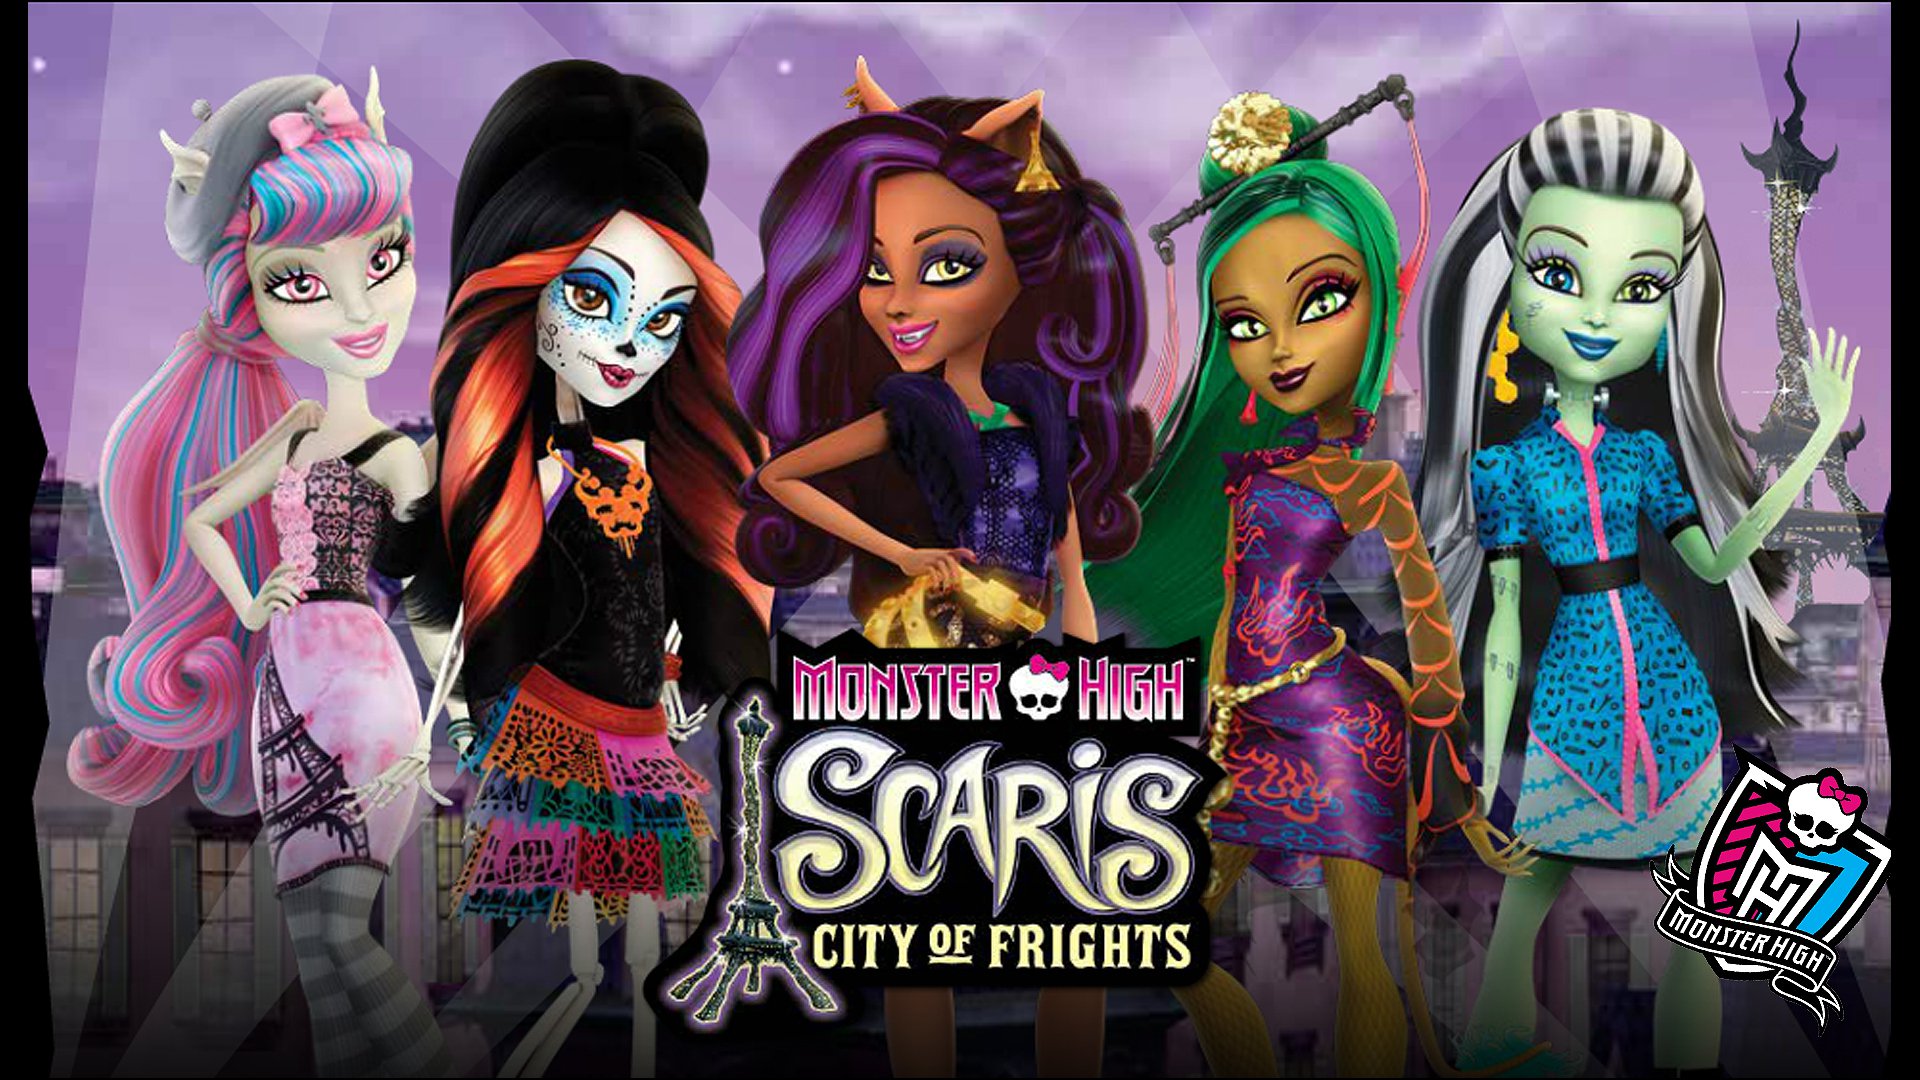 High Definition Monster High: Scaris City Of Frights wallpaper